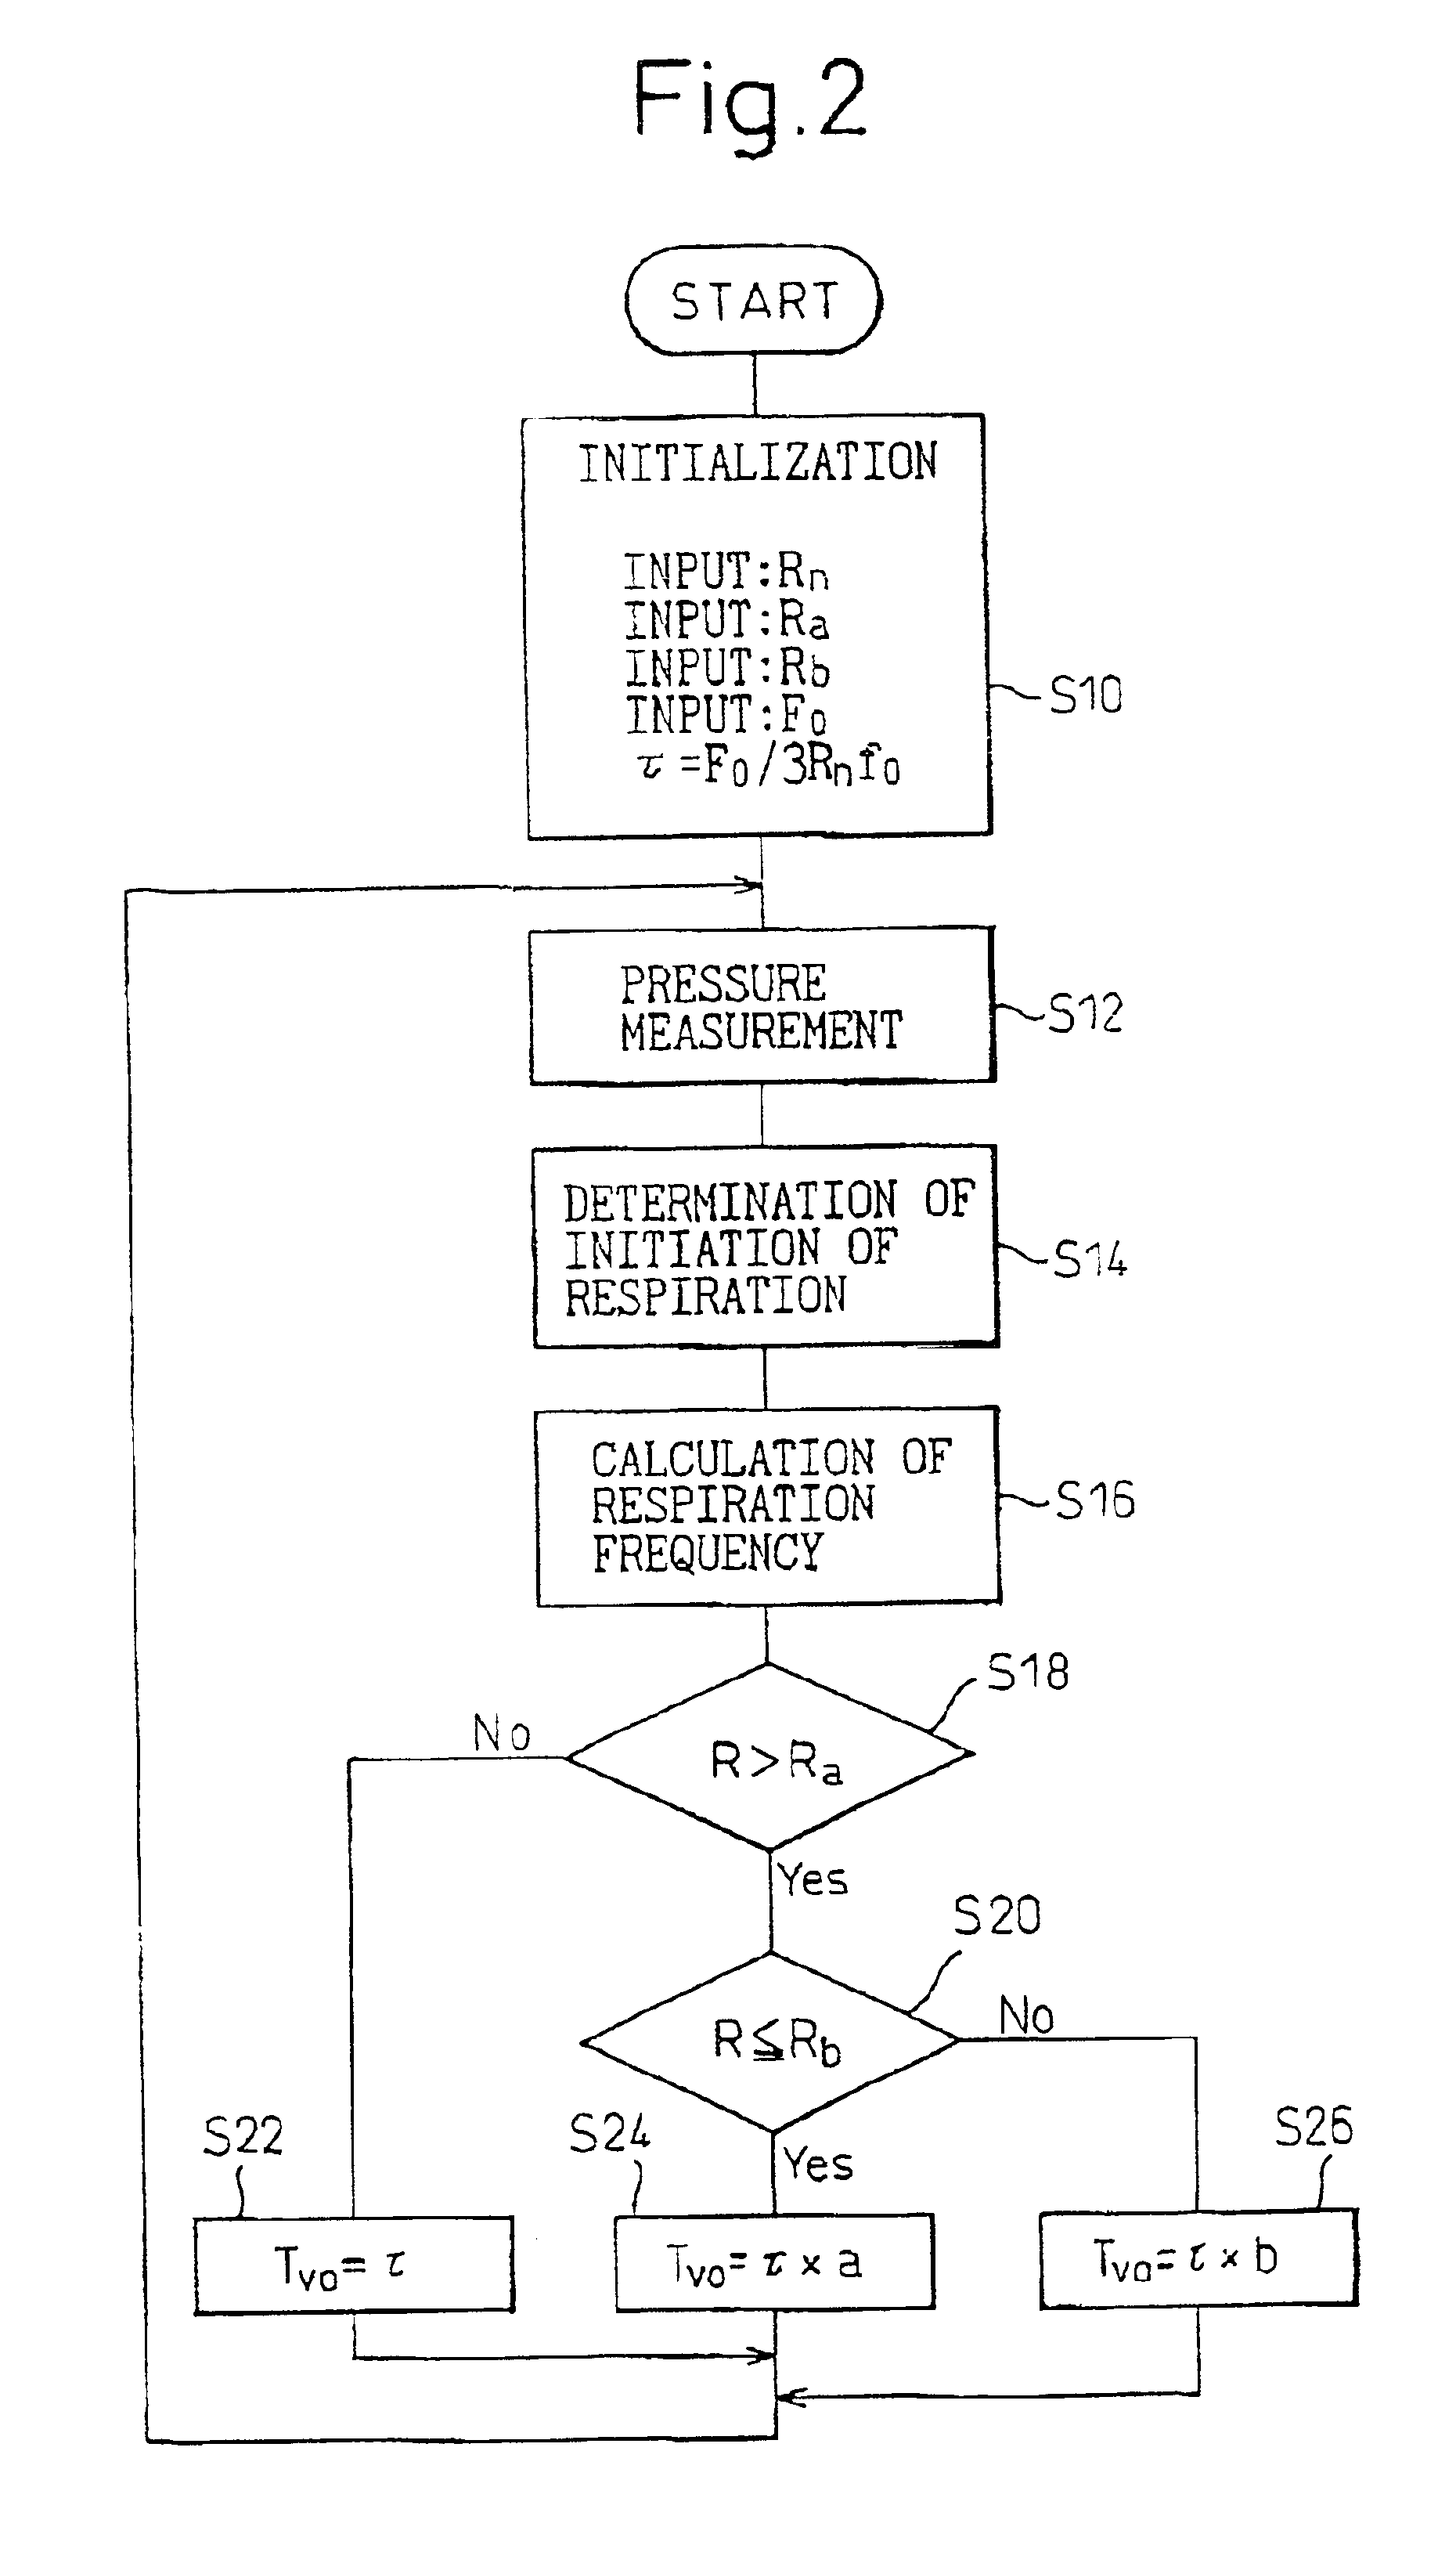 Apparatus for supplying a therapeutic oxygen gas